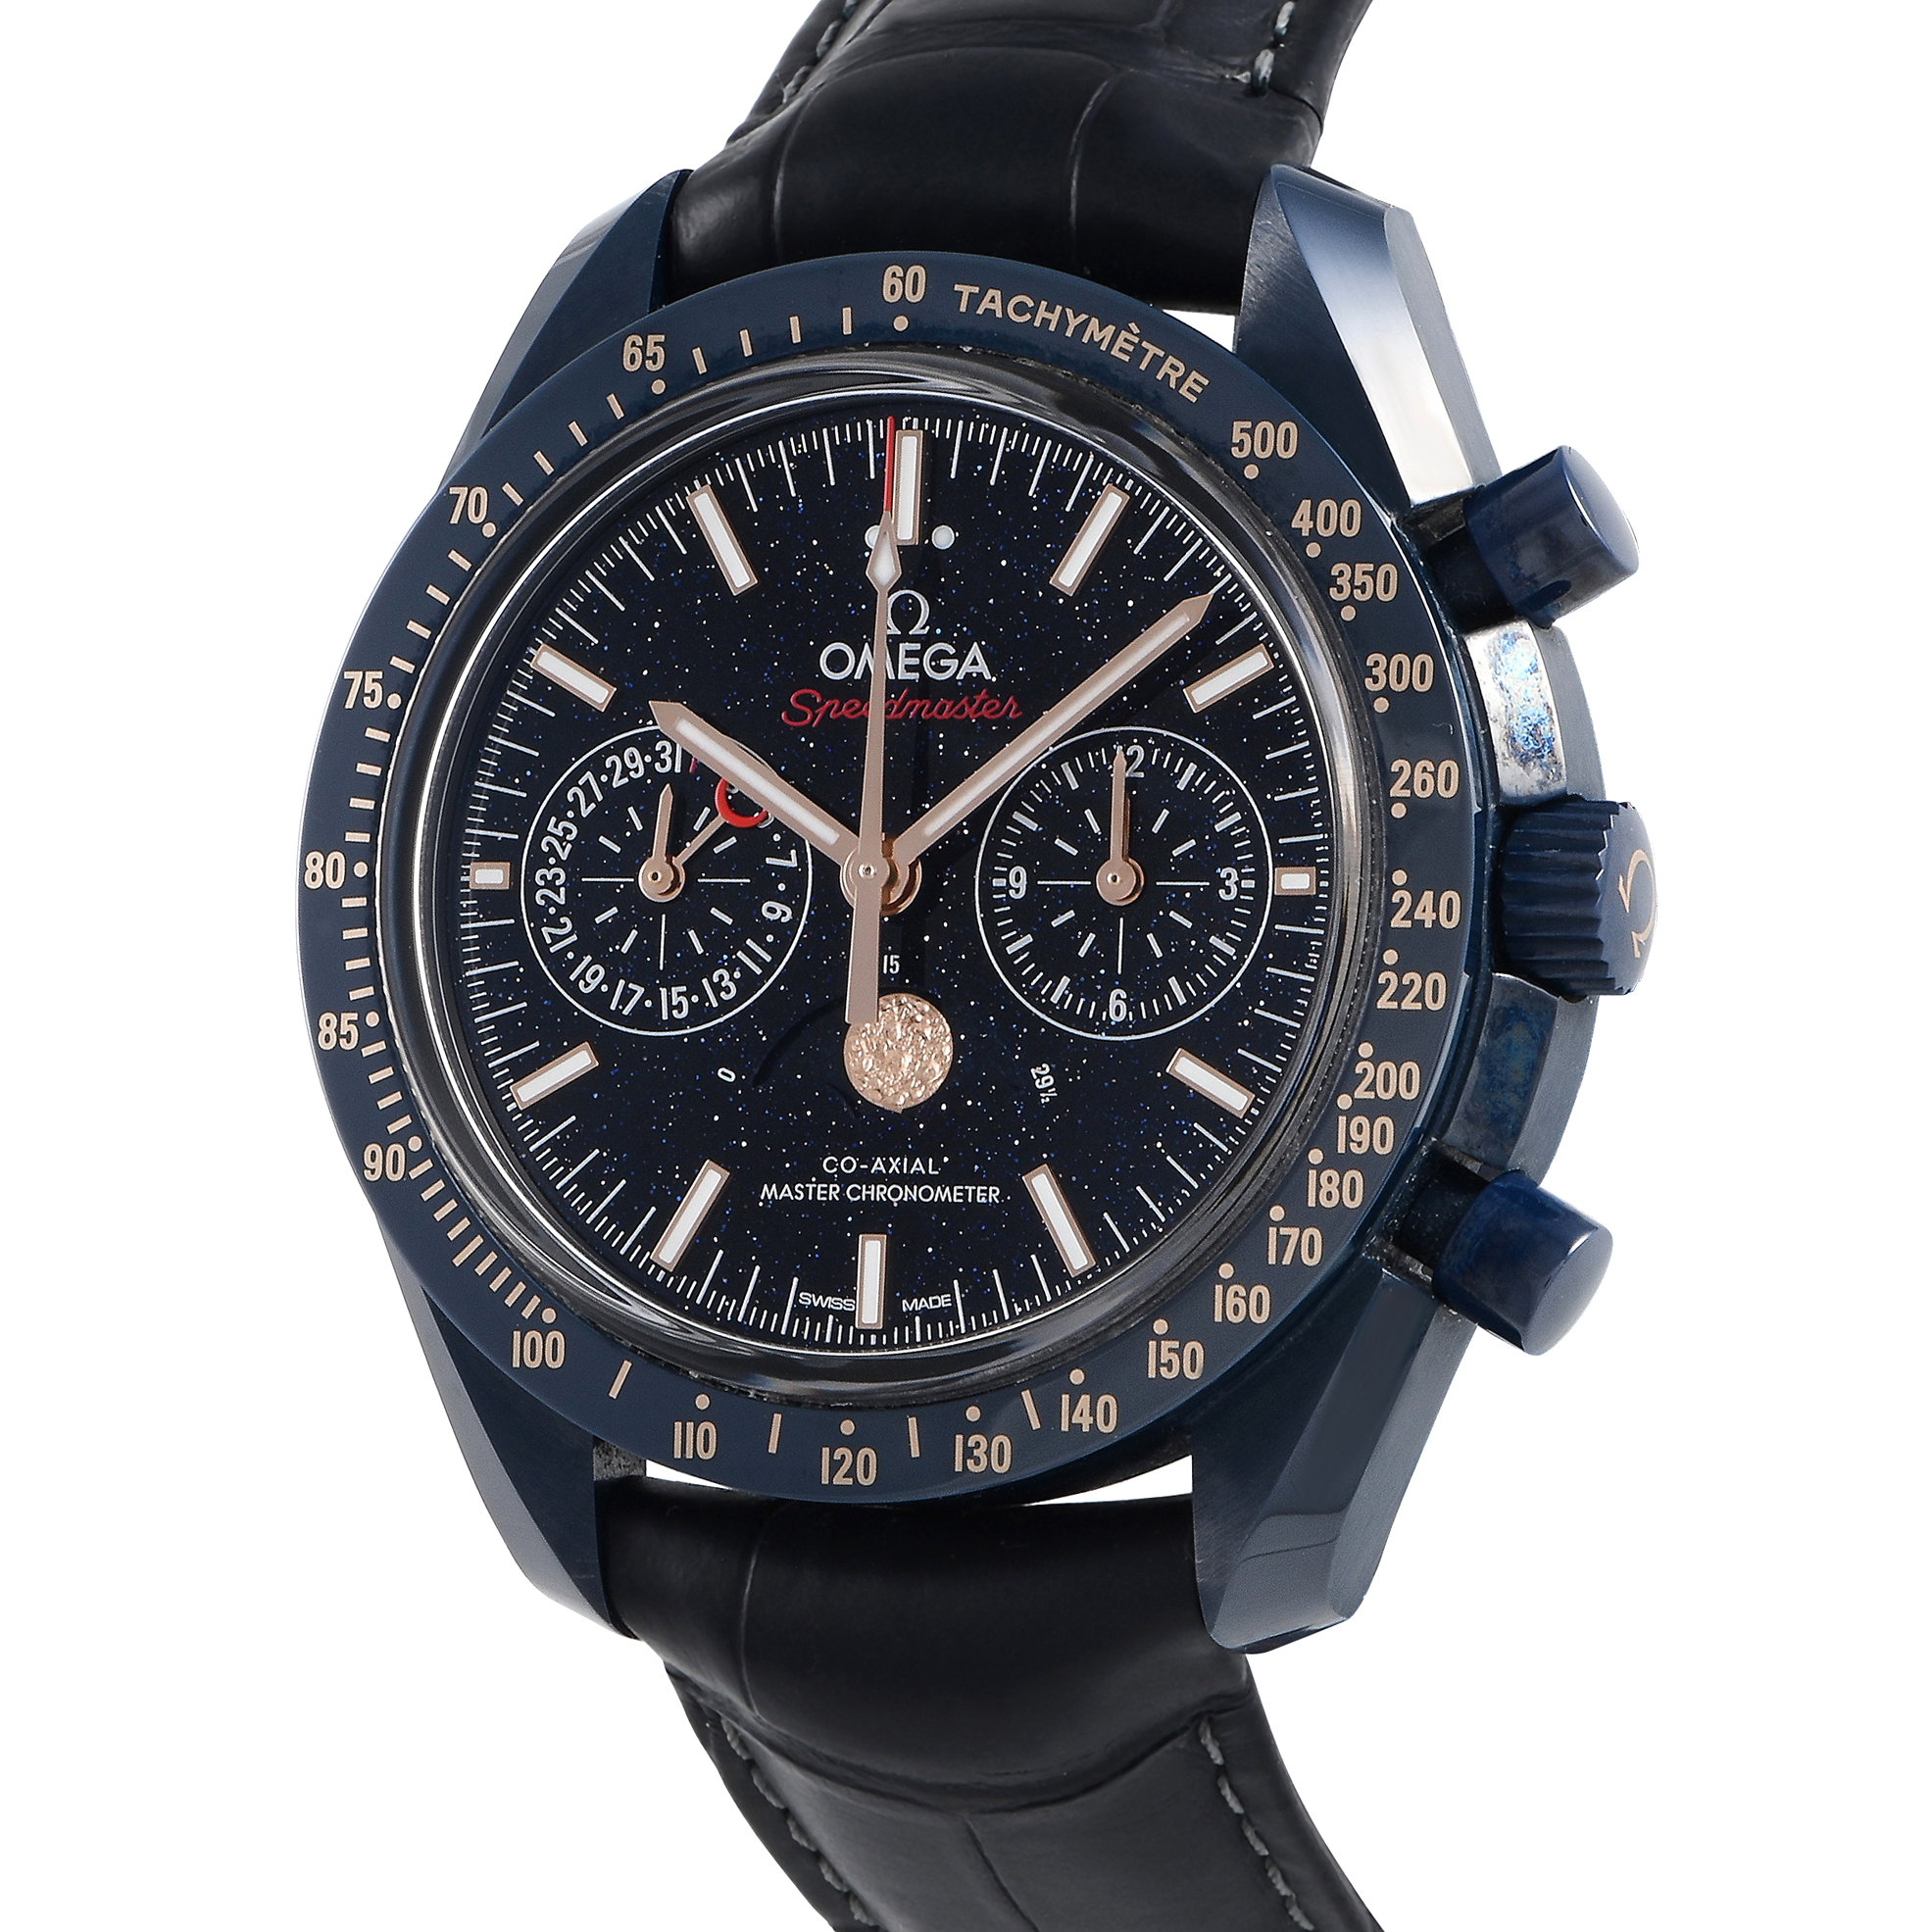 Omega Speedmaster Moonphase Blue Side of the Moon Watch 304.93.44.52.03.002